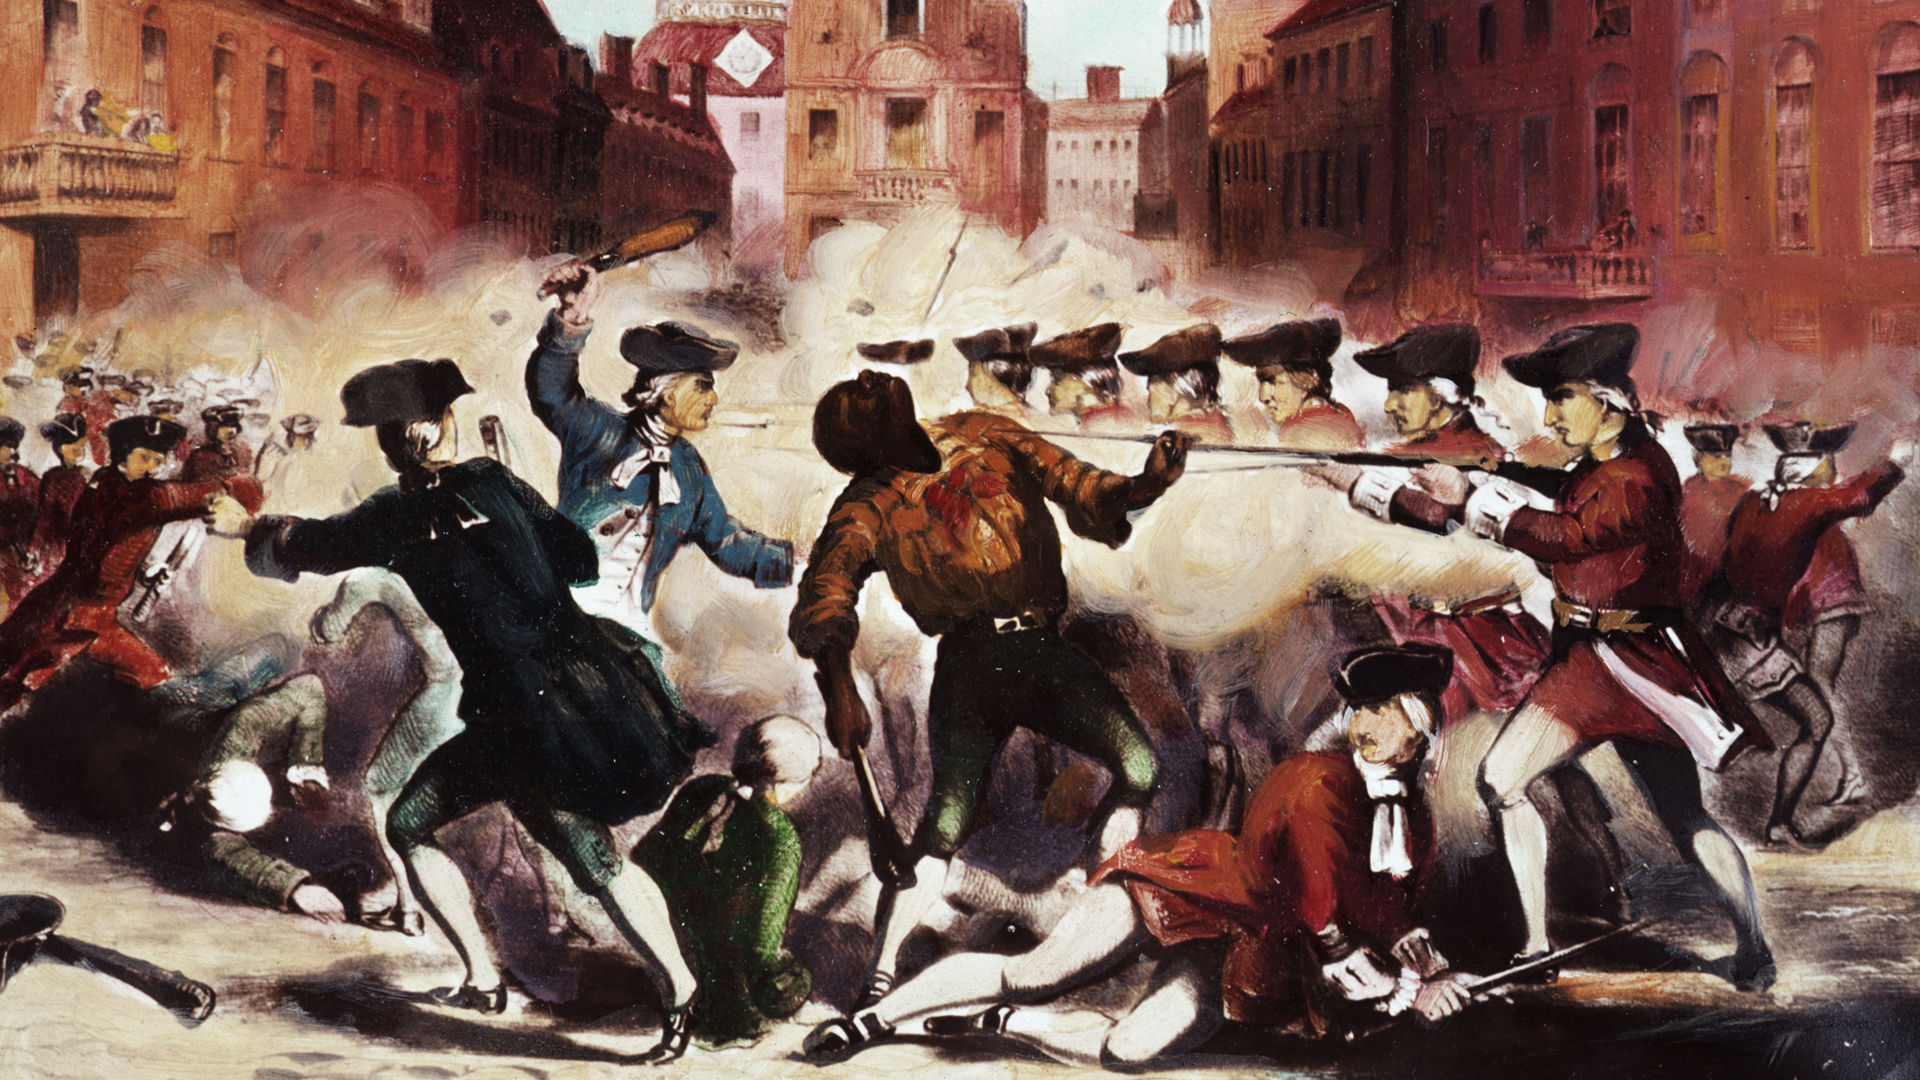 Read More: 8 Things We Know About Crispus Attucks